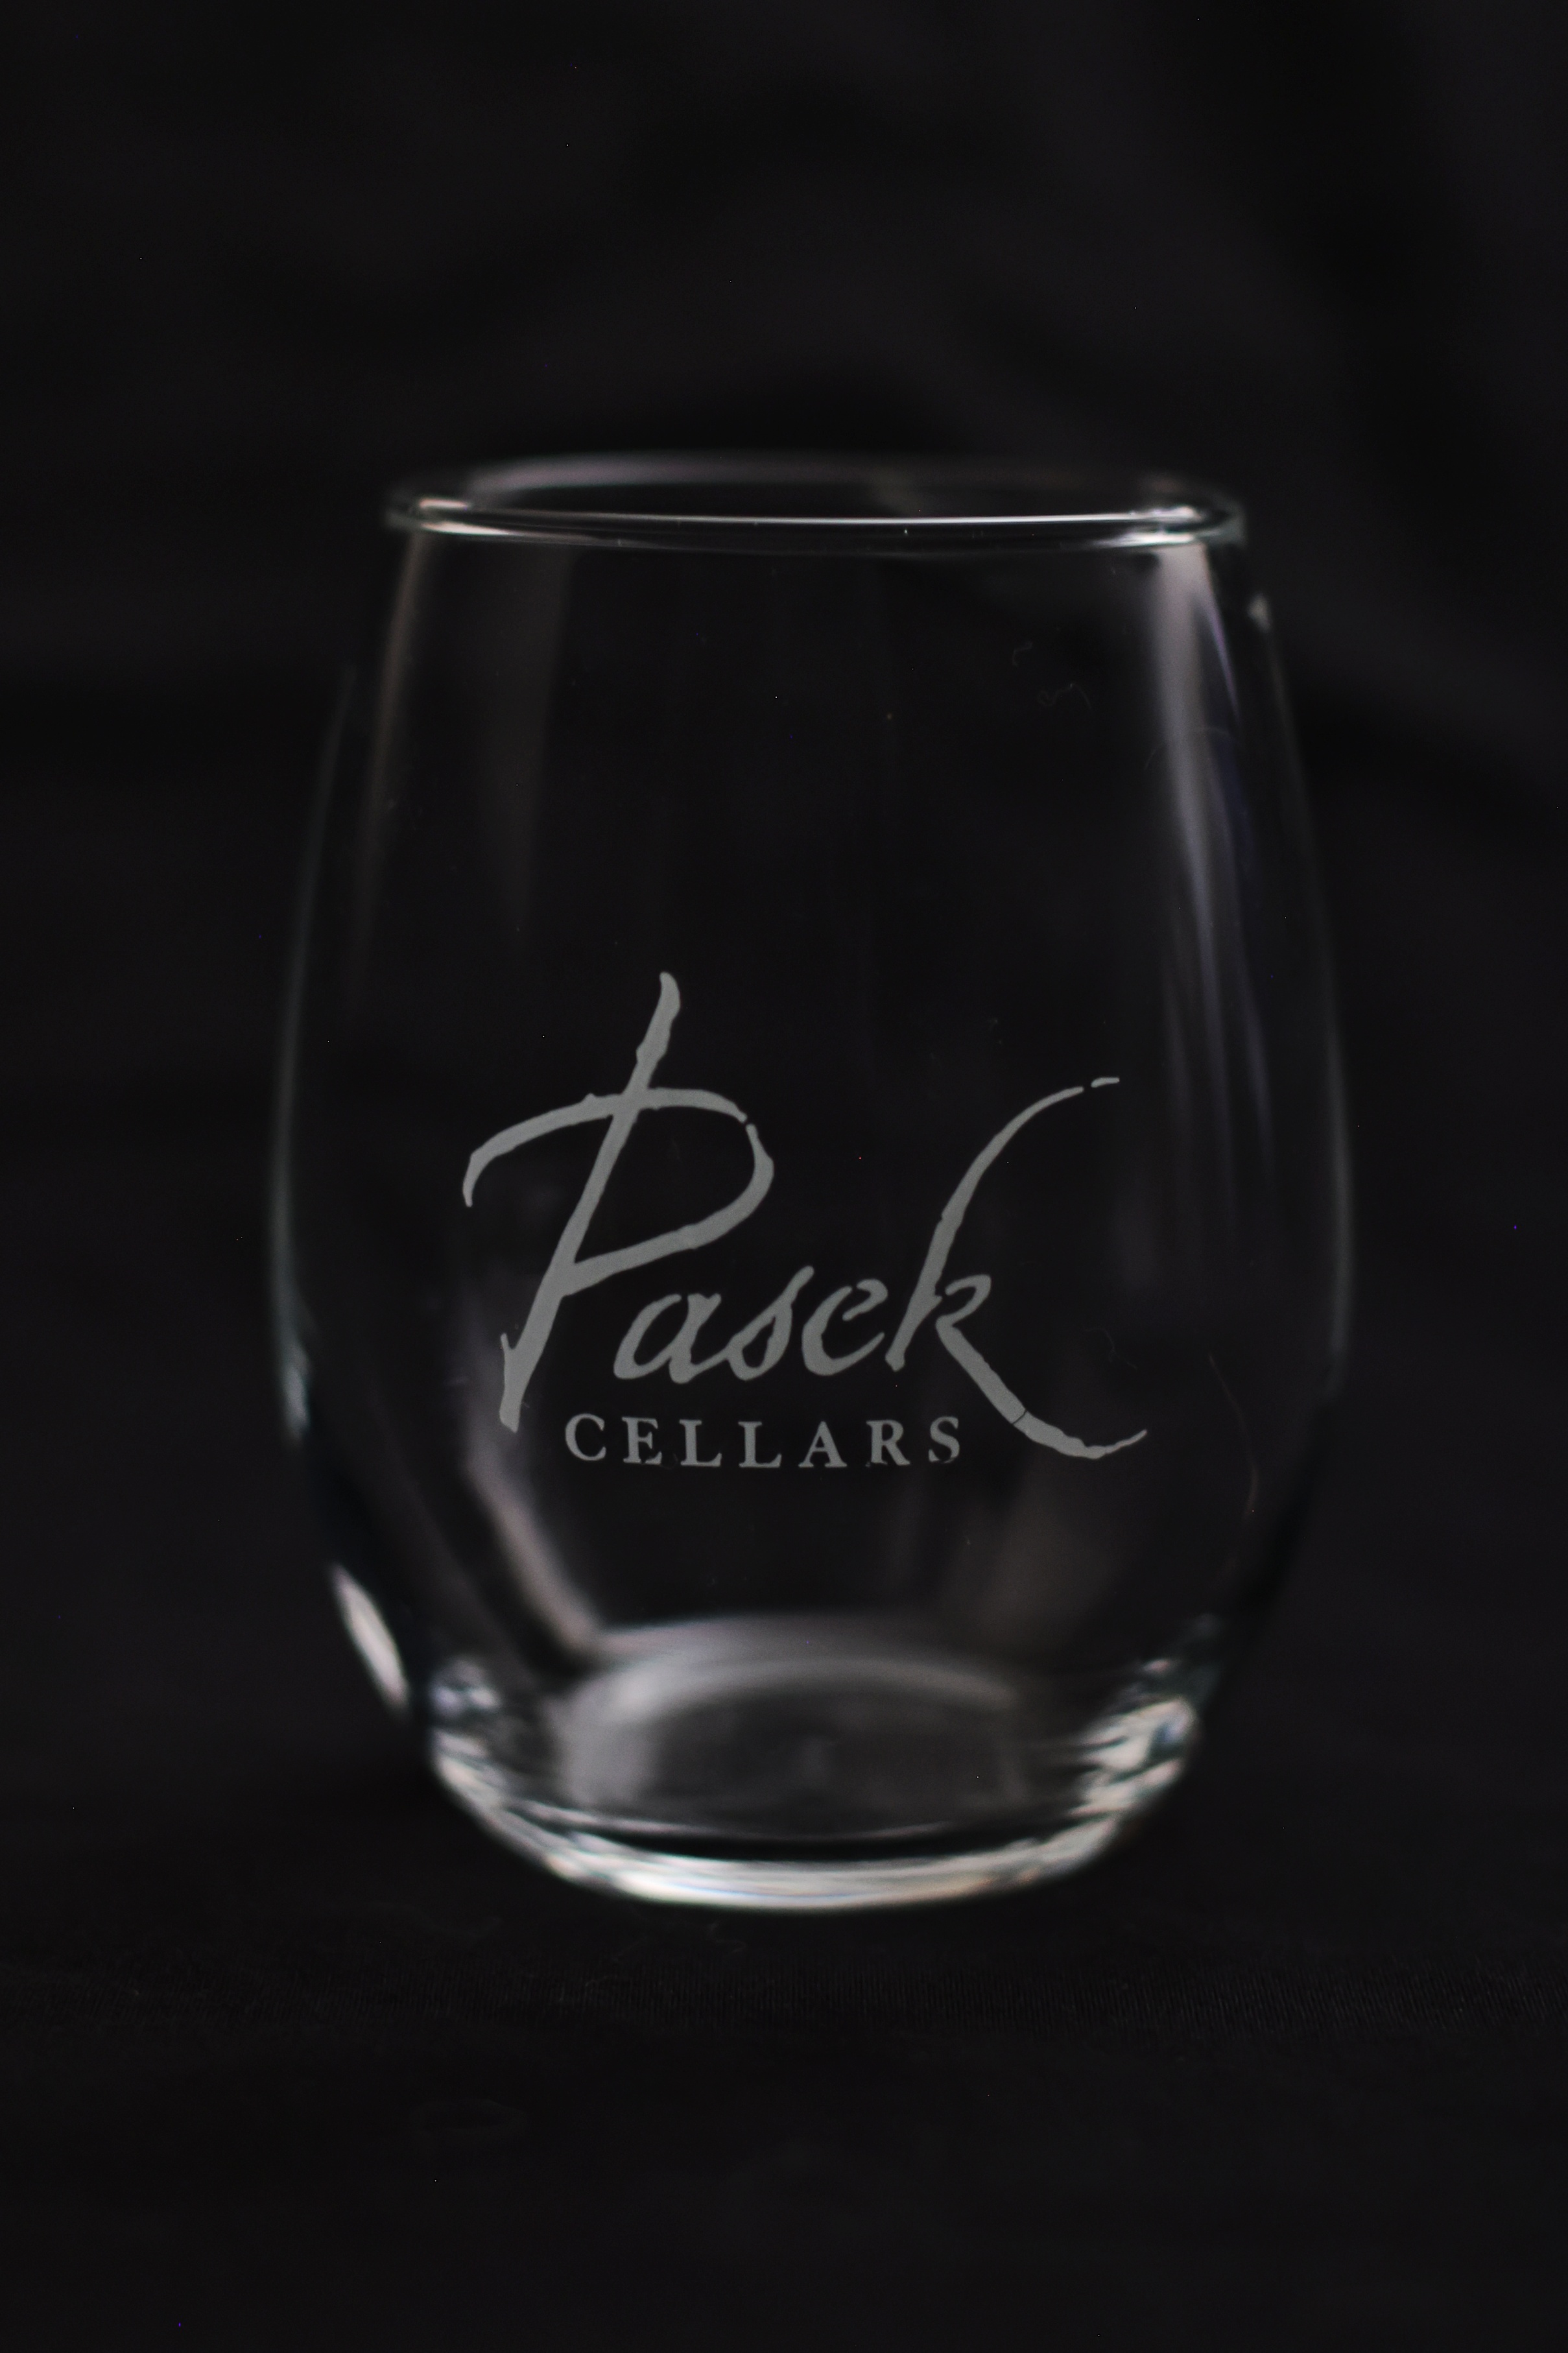 Product Image for Pasek Cellars Stemless Wine Glass